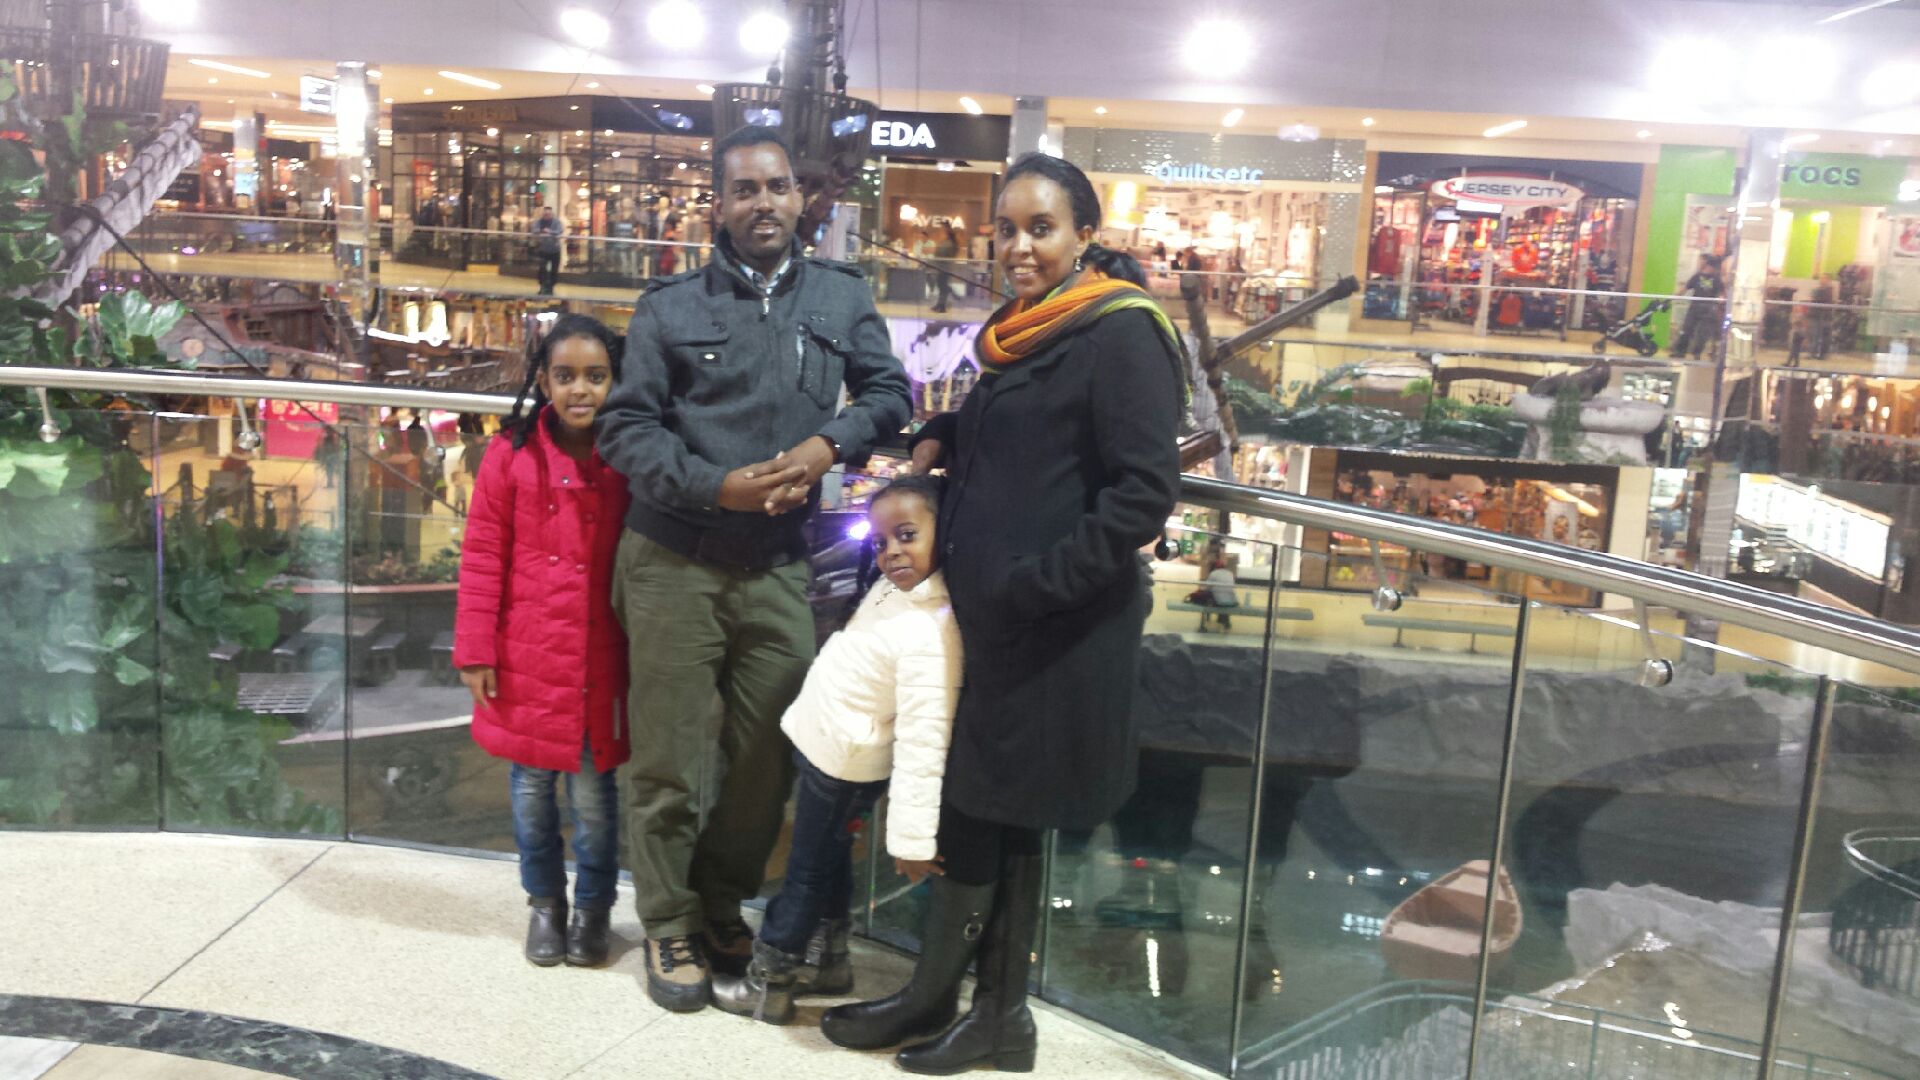 One week old in Canada visiting West Edmonton Mall - it is Amazing